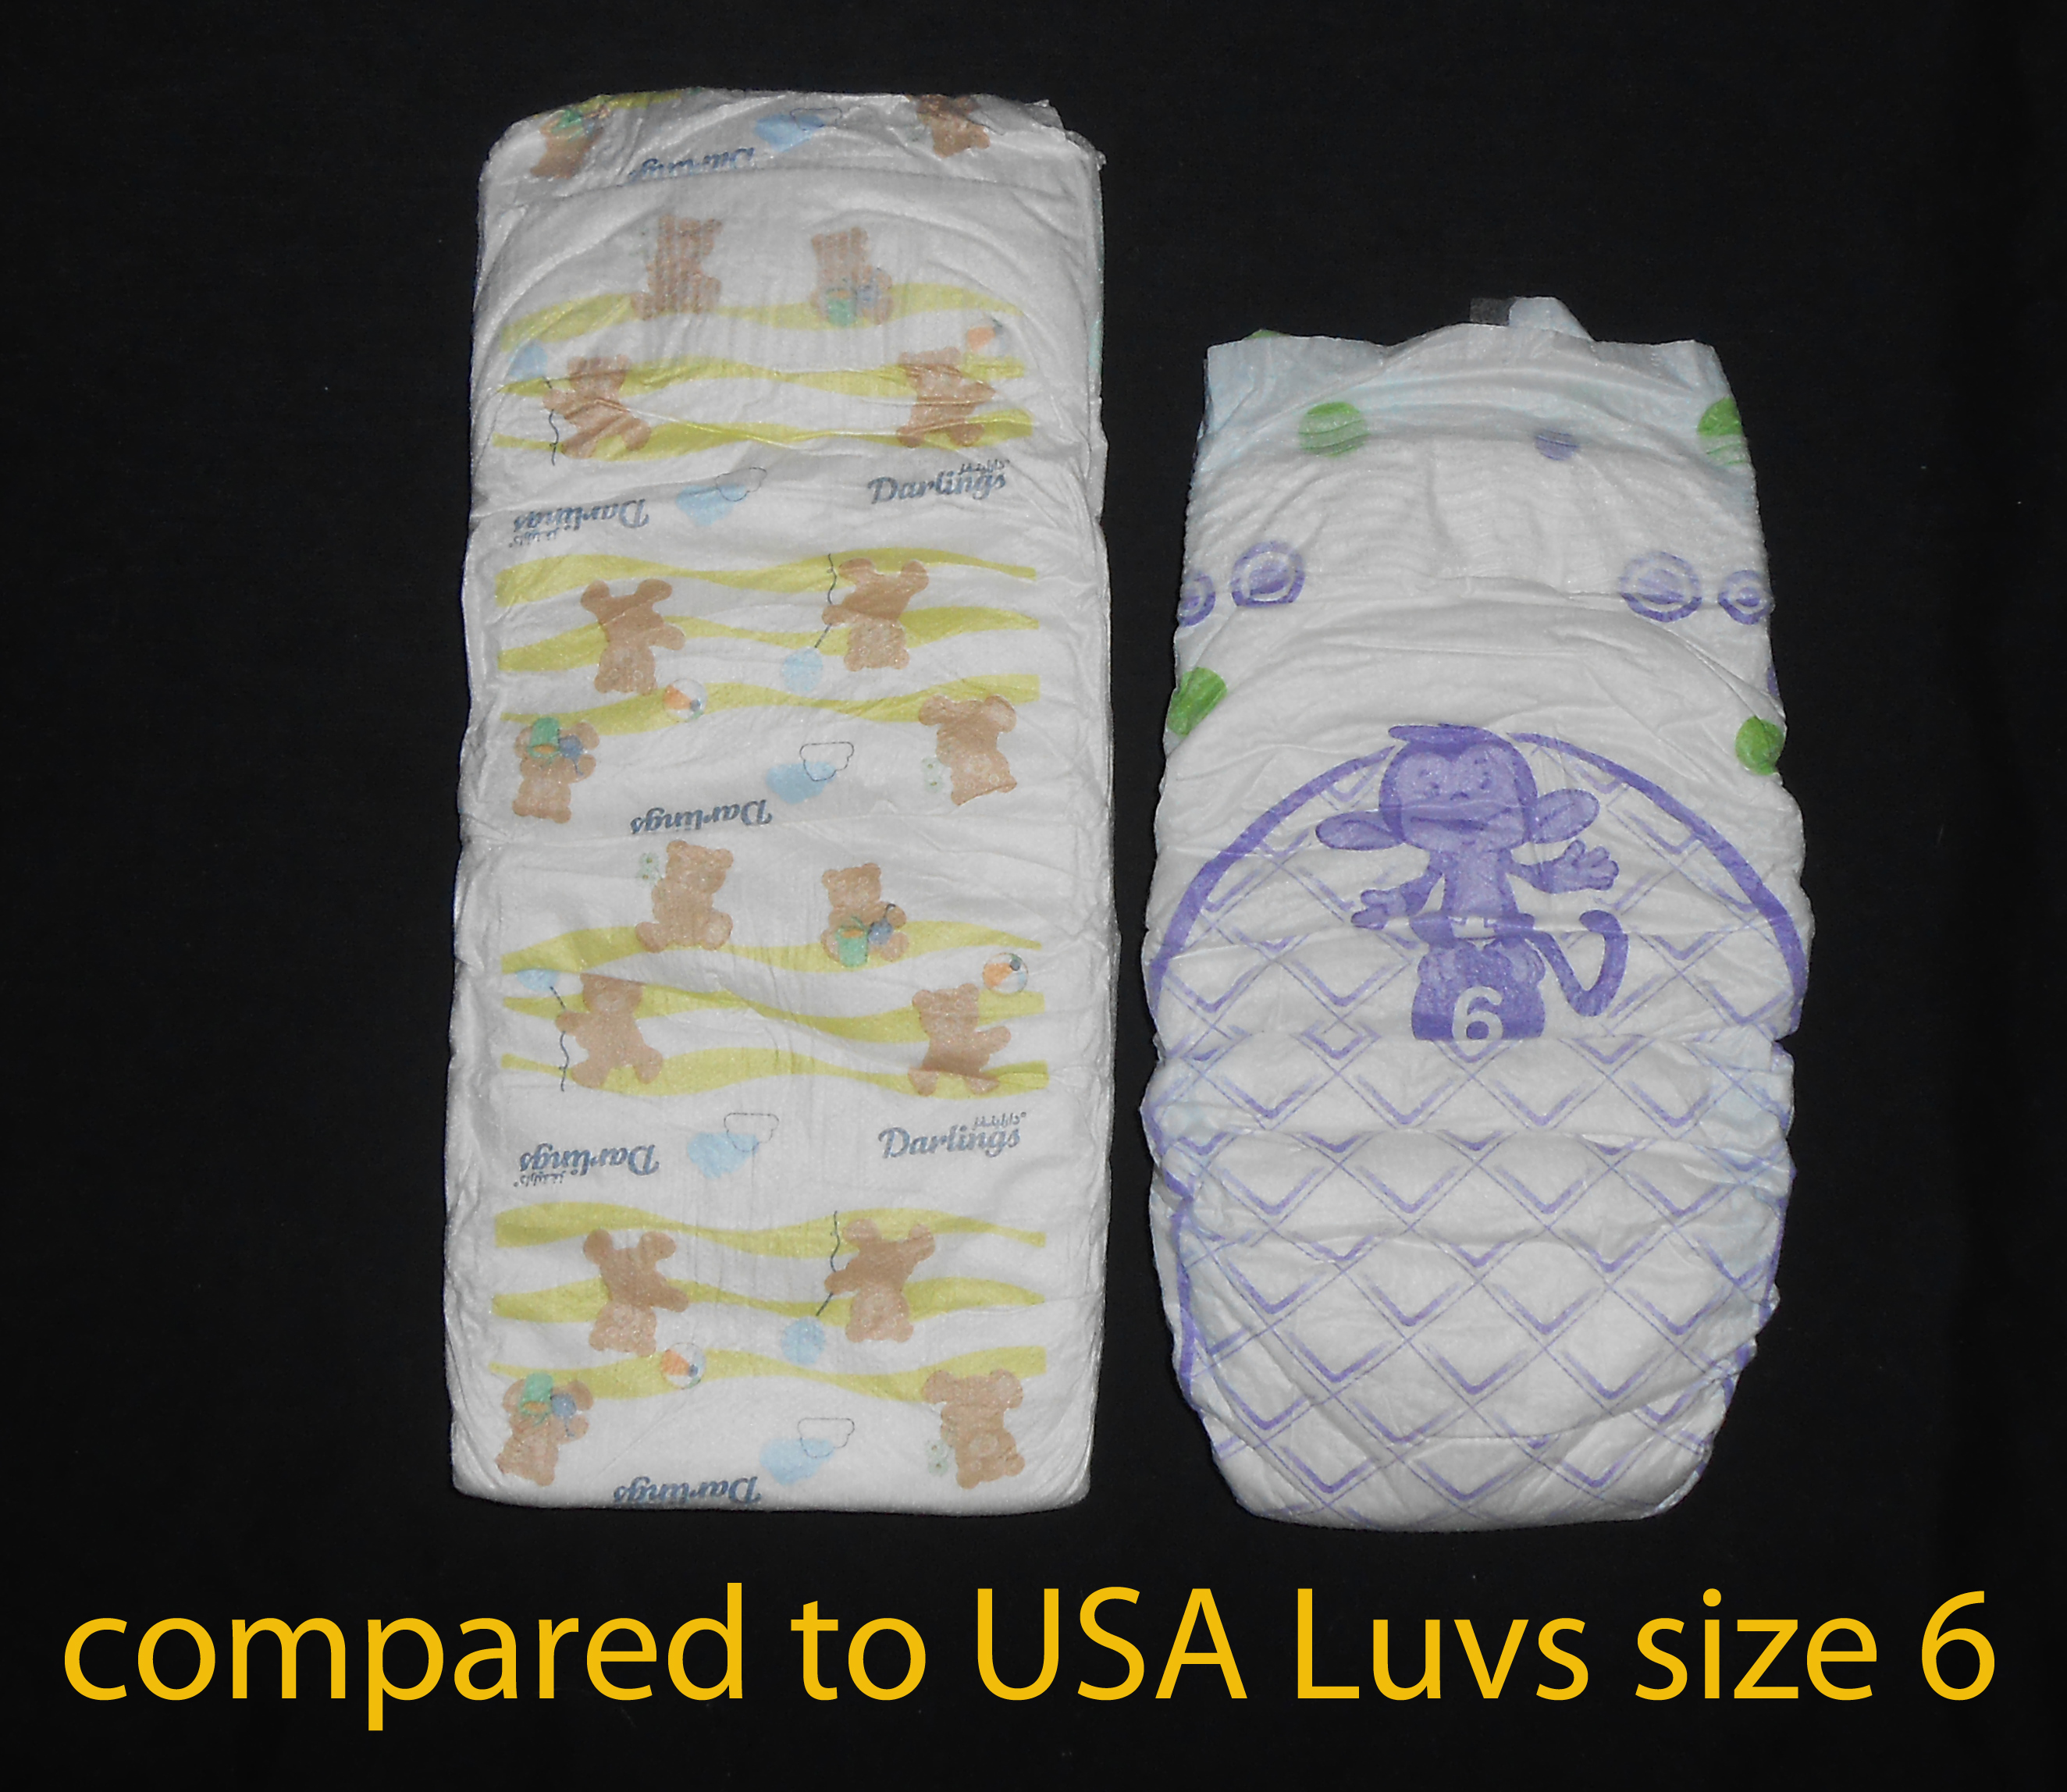 LARGEST BABY DIAPERS EVER FOUND! - The 